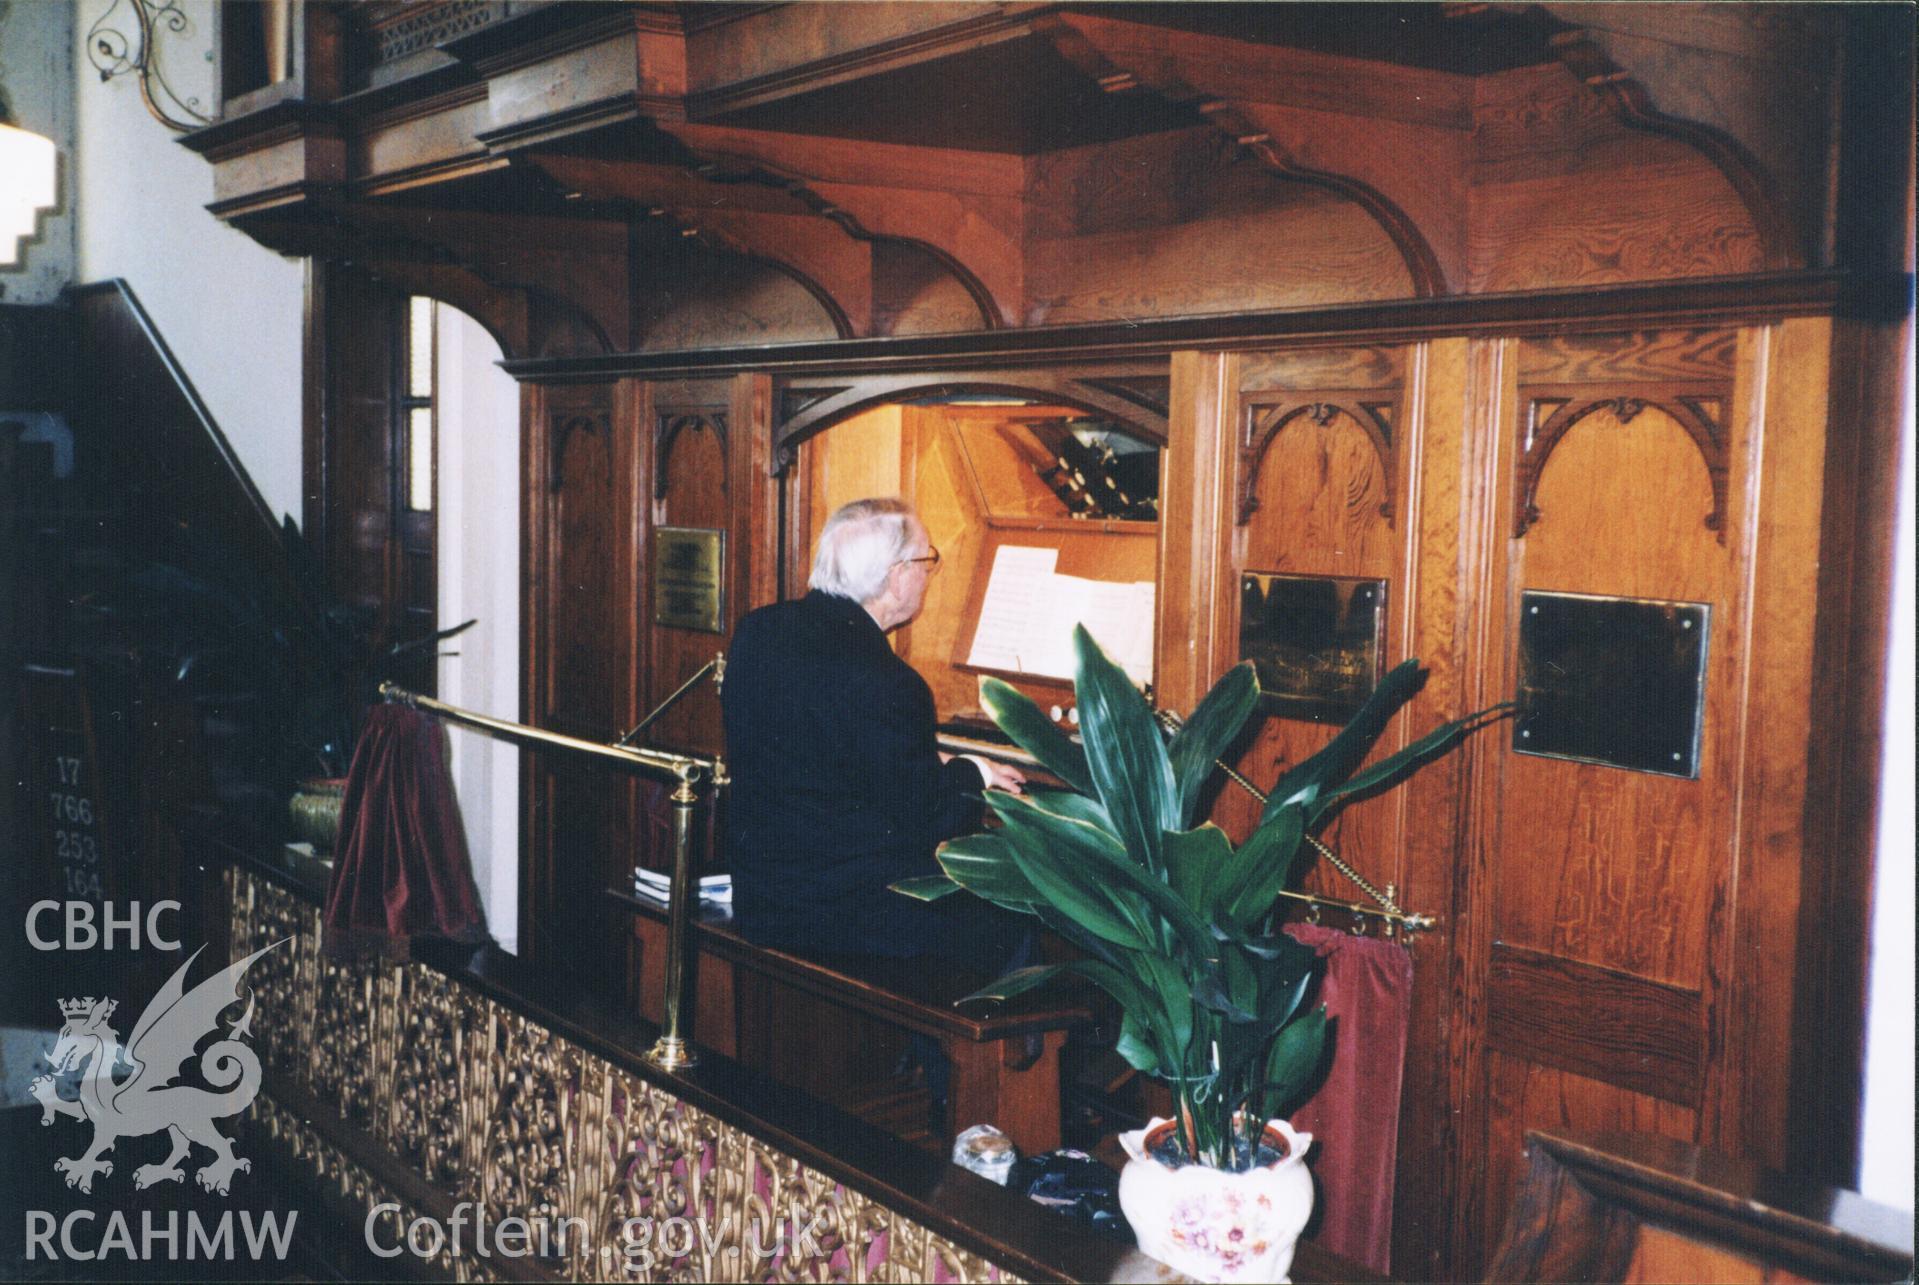 Colour photograph of past organist Aneurin Thomas, playing the organ for the last time, 2003. Donated to the RCAHMW by Cyril Philips as part of the Digital Dissent Project.